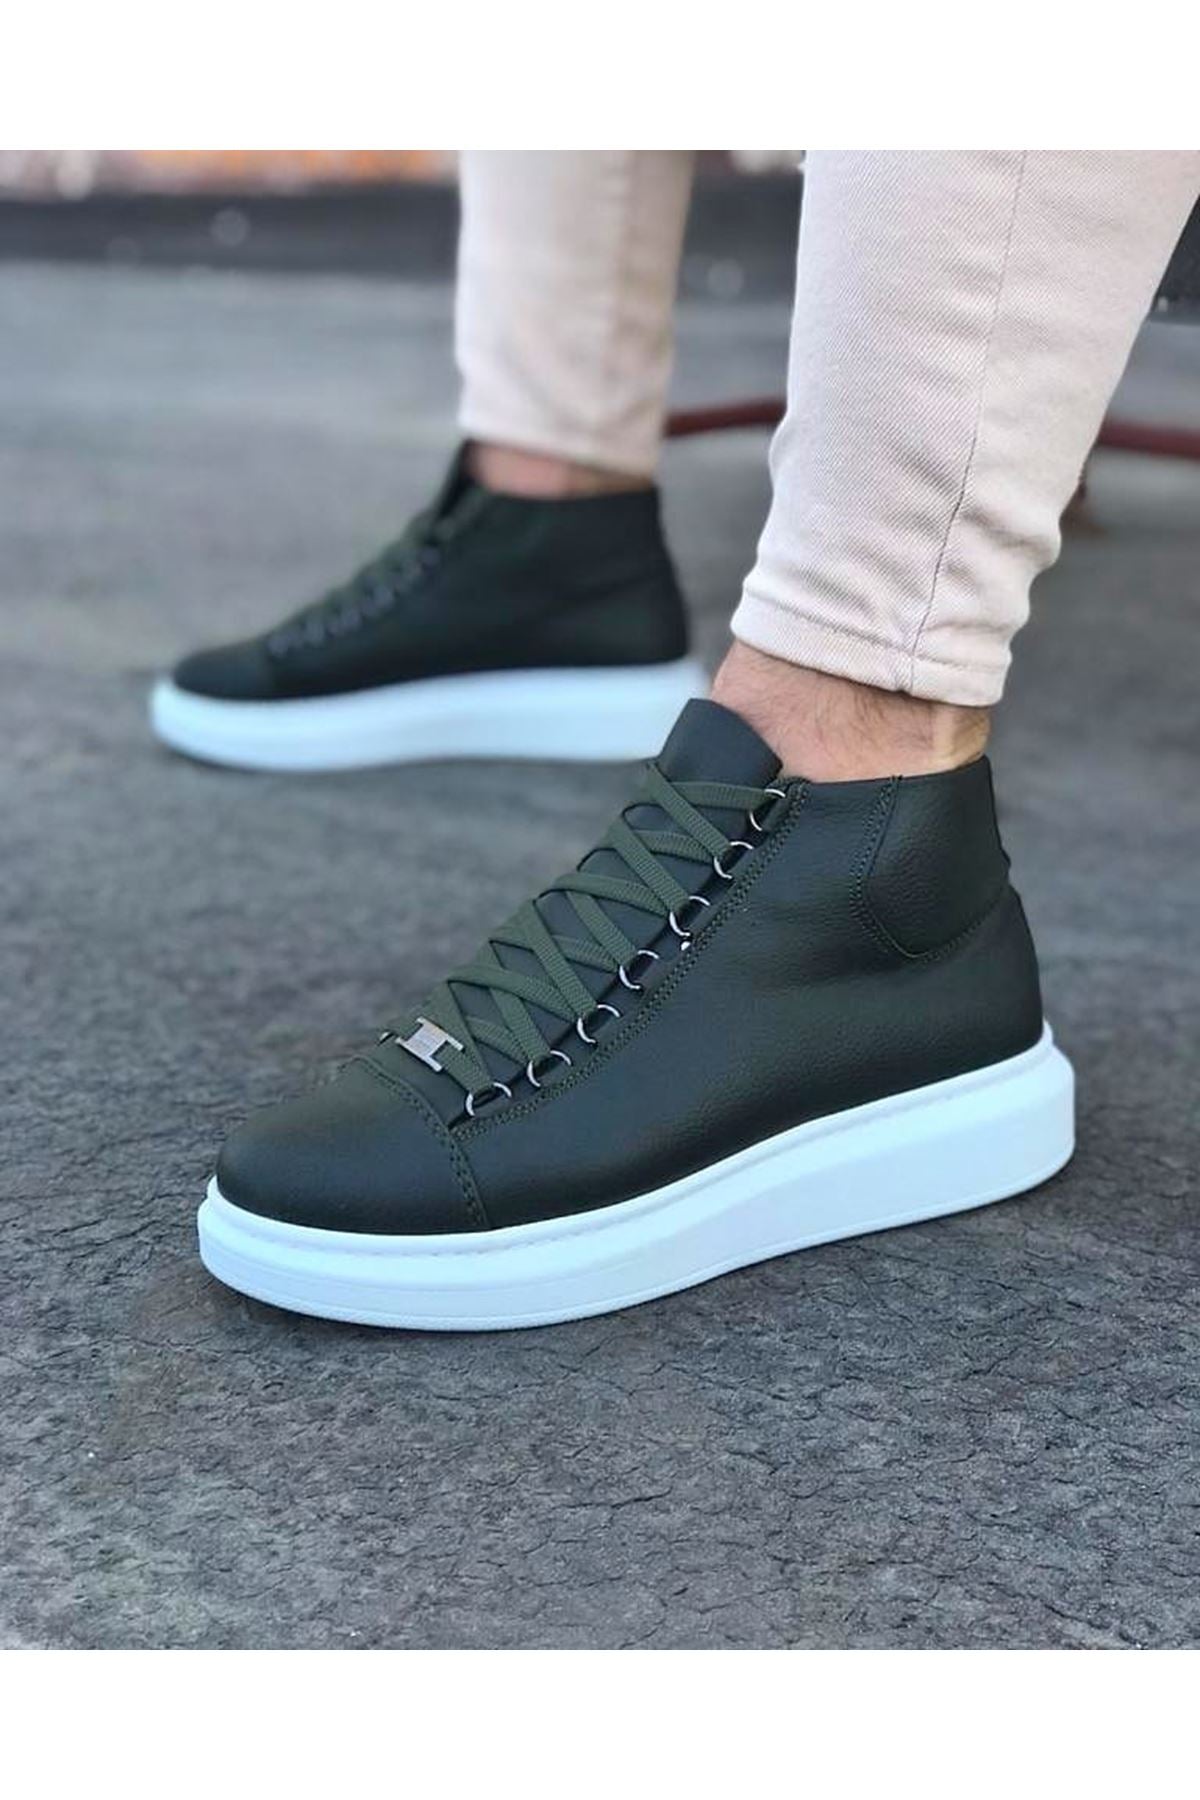 WG032 Khaki Lace-up Sneakers Half Ankle Boots - STREETMODE ™